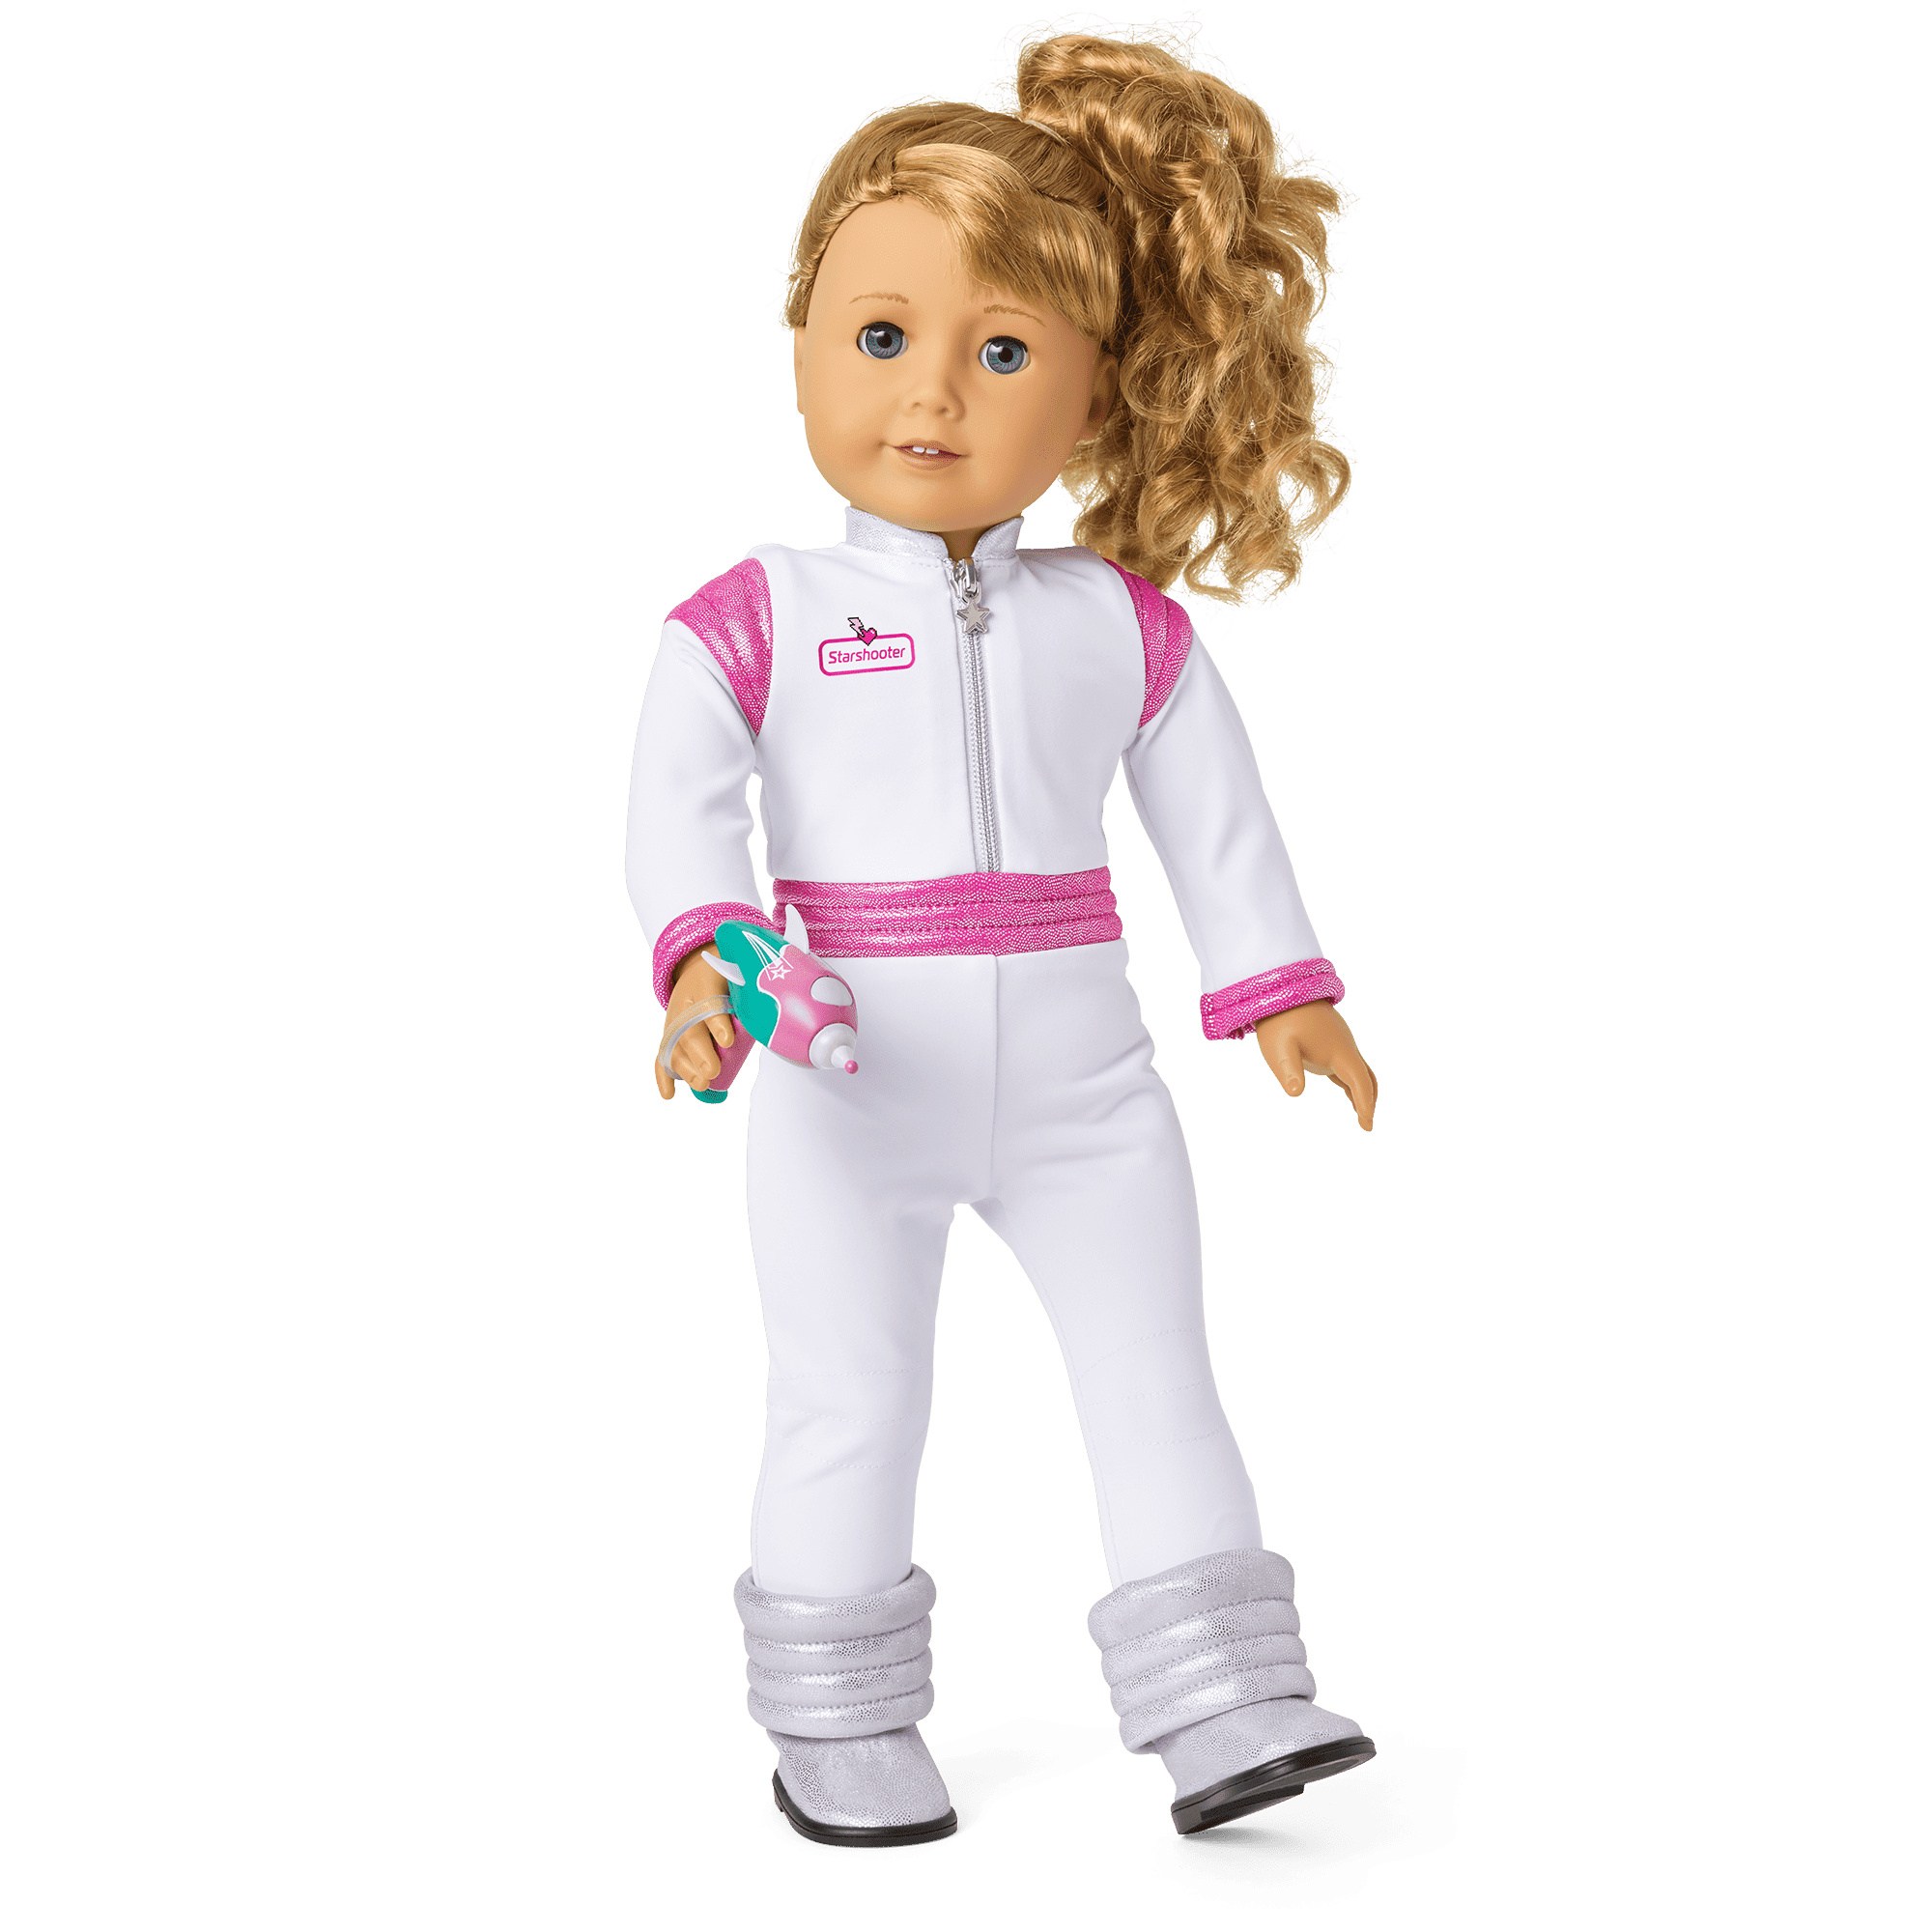 Courtney's™ Halloween Costume for 18-inch Dolls